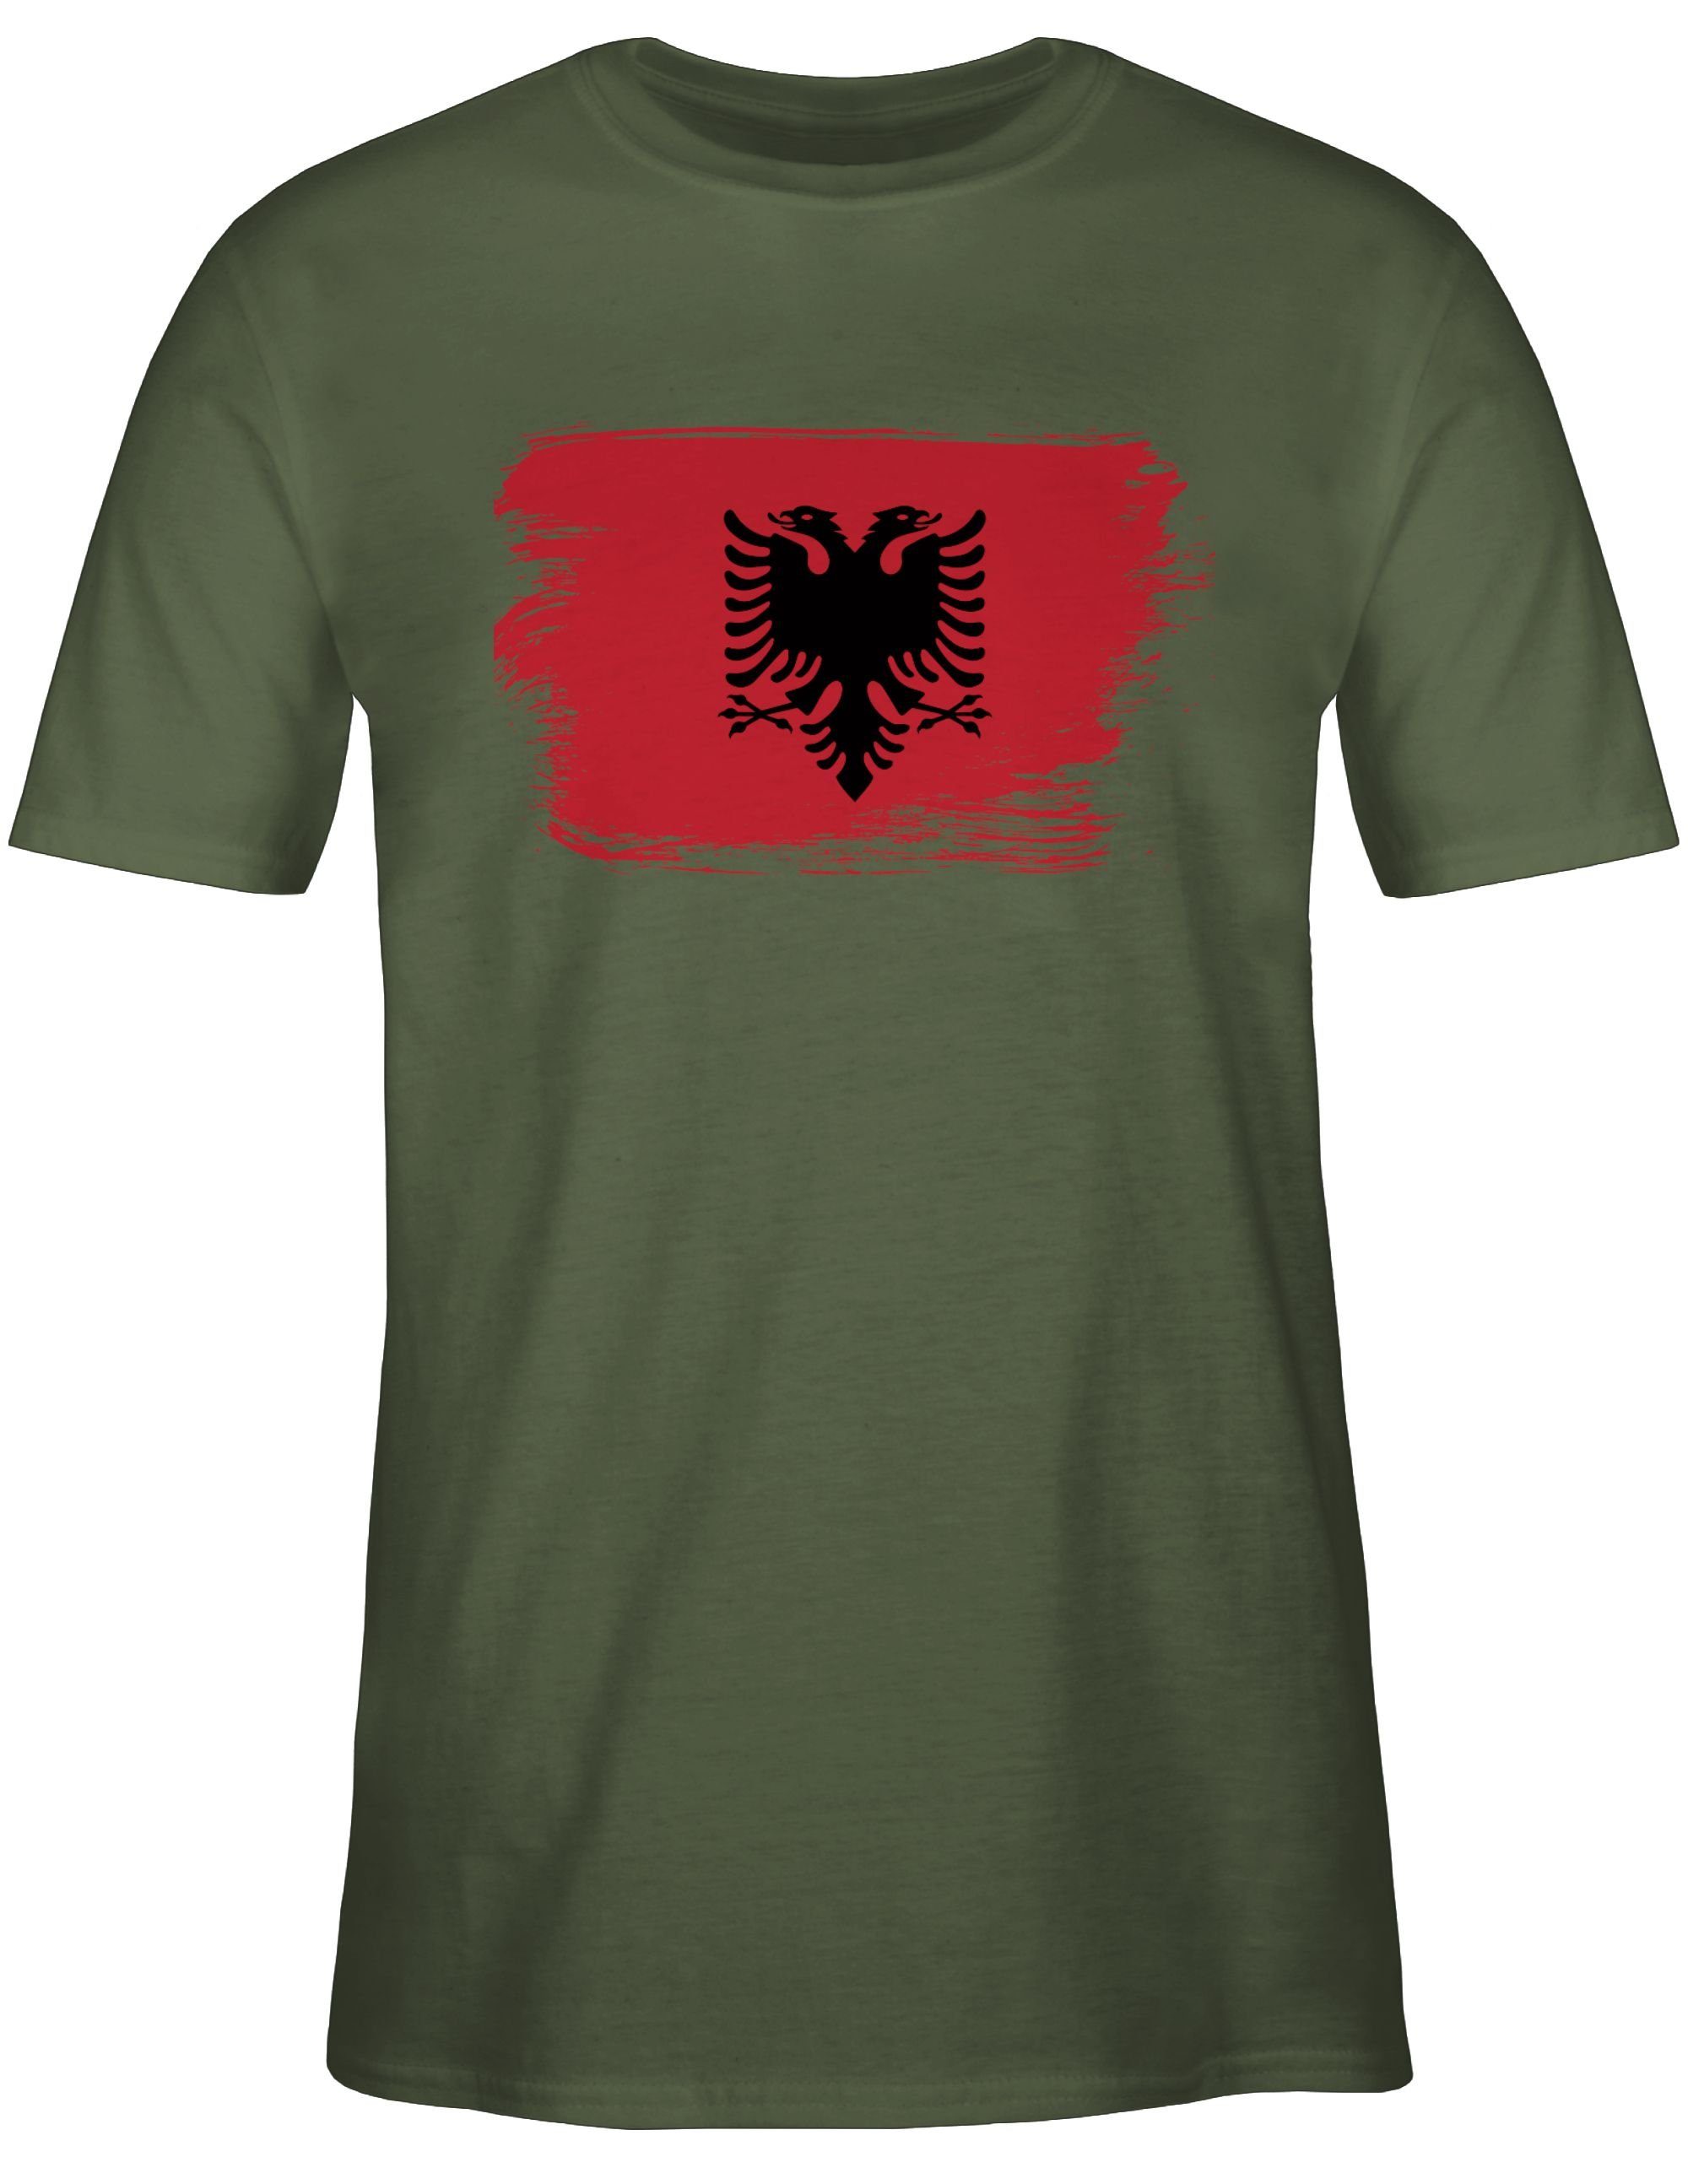 T-Shirt Flagge Grün Army Outfit 2 Vintage Shirtracer Stadt und Albanien City